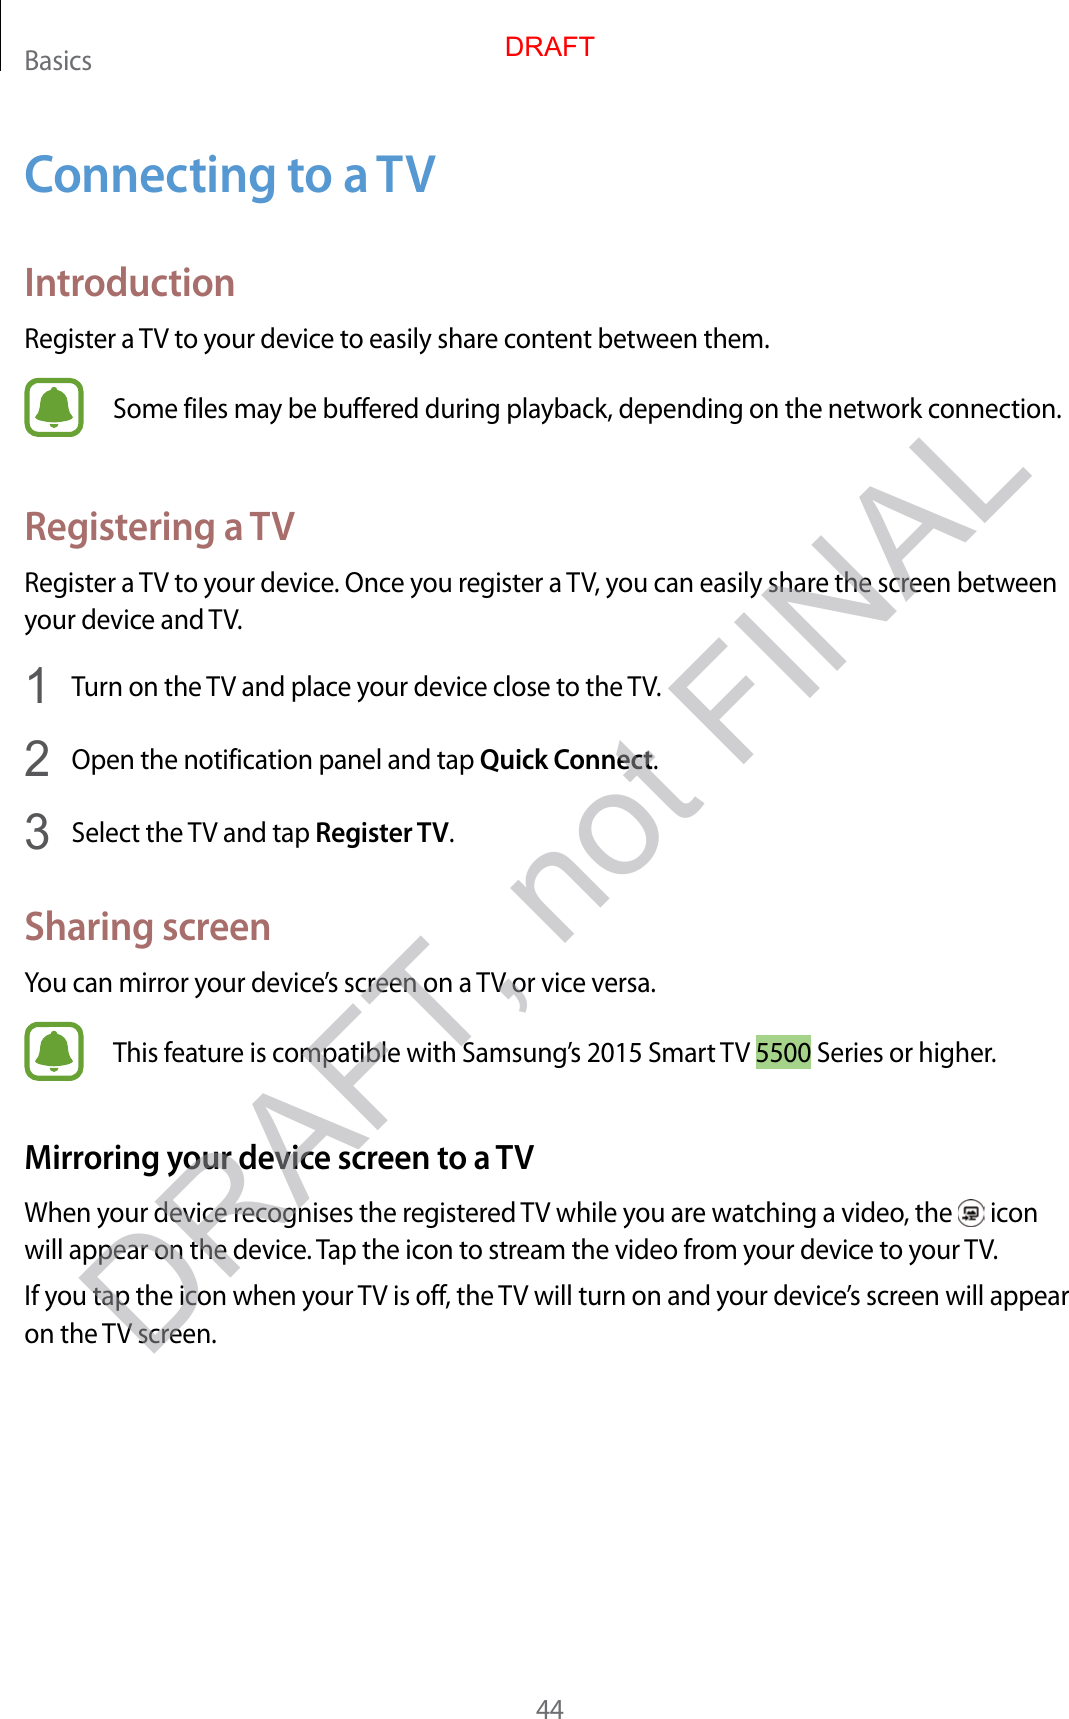 Basics44C onnecting to a TVIntroductionRegister a TV to your device t o easily shar e c ont ent between them.Some files may be buffer ed during pla yback, depending on the network connection.Registering a TVRegister a TV to your device. Once you reg ister a TV, you can easily shar e the scr een between your device and TV.1  Turn on the TV and place your device close to the TV.2  Open the notification panel and tap Quick Connect.3  Select the TV and tap Register TV.Sharing screenYou can mirror your device’s screen on a TV or vice versa.This f eatur e is c ompatible with Samsung’s 2015 Smart TV 5500 Series or higher.Mirroring your de vic e screen t o a TVWhen your devic e r ecog nises the r eg ister ed TV while you are wat ching a video, the   icon will appear on the device . Tap the icon to stream the video from y our devic e t o y our TV.If you tap the icon when your TV is off , the TV will turn on and your devic e’s screen will appear on the TV screen.DRAFT, not FINALDRAFT